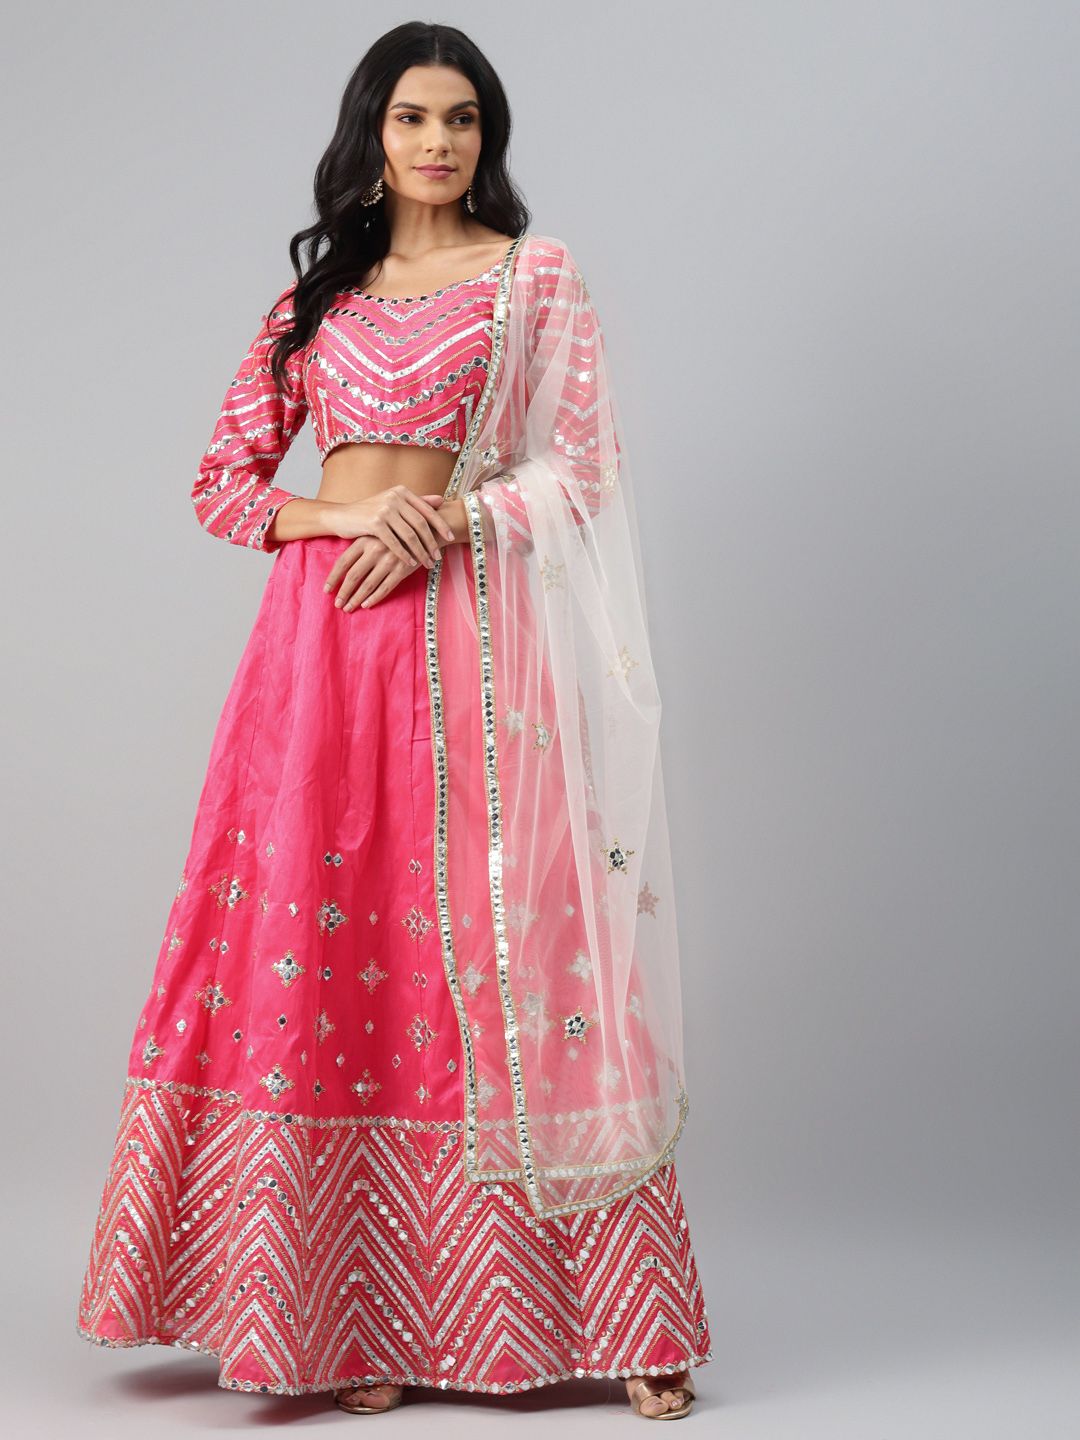 Readiprint Fashions Pink & Silver-Toned Embellished Semi-Stitched Lehenga & Unstitched Blouse with Dupatta Price in India